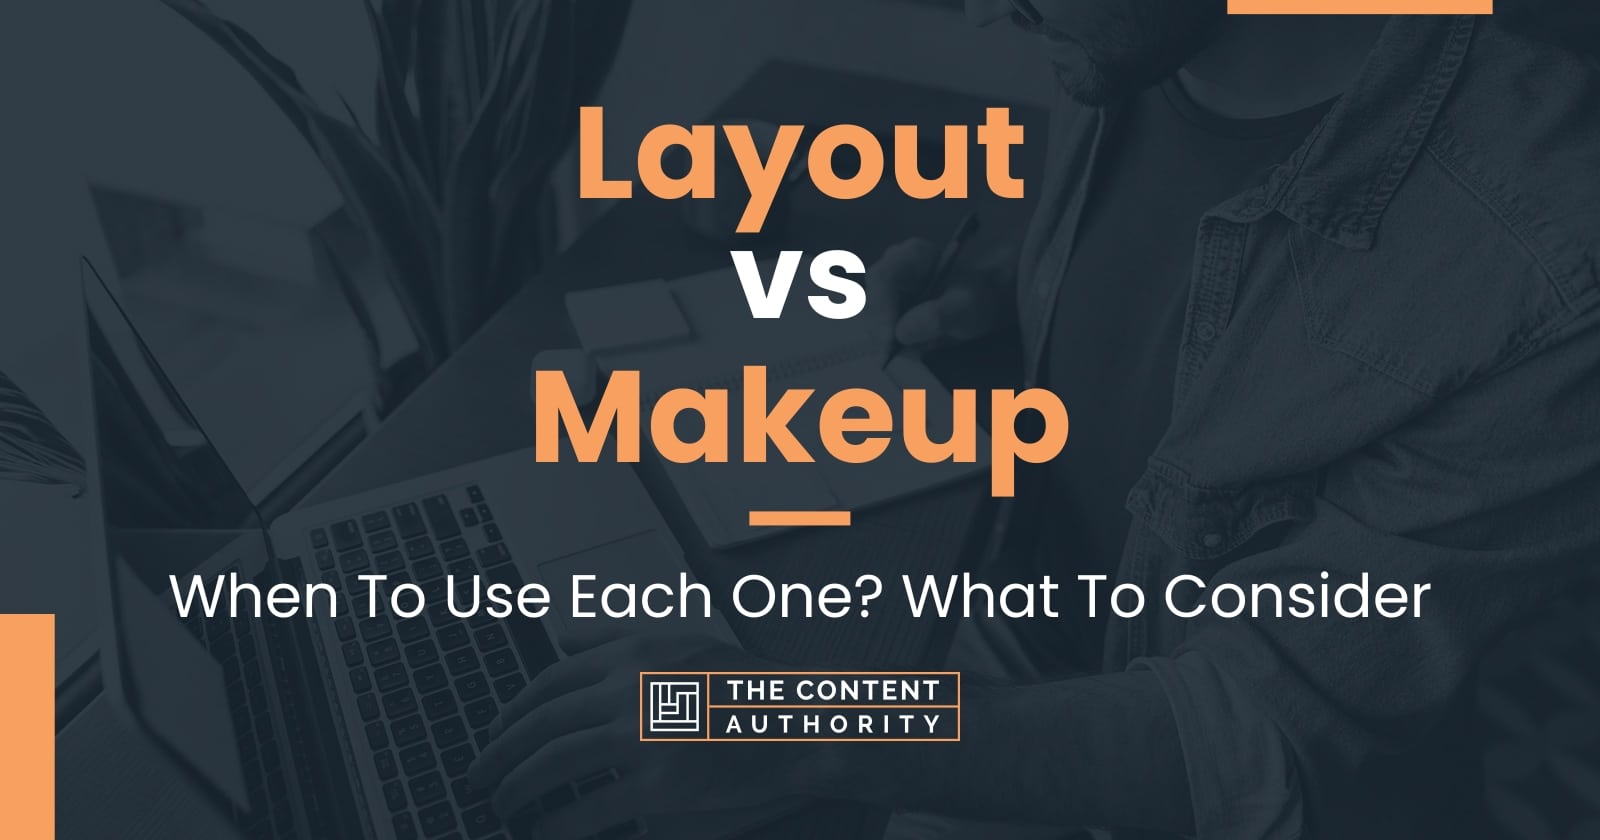 Layout Vs Makeup When To Use Each One